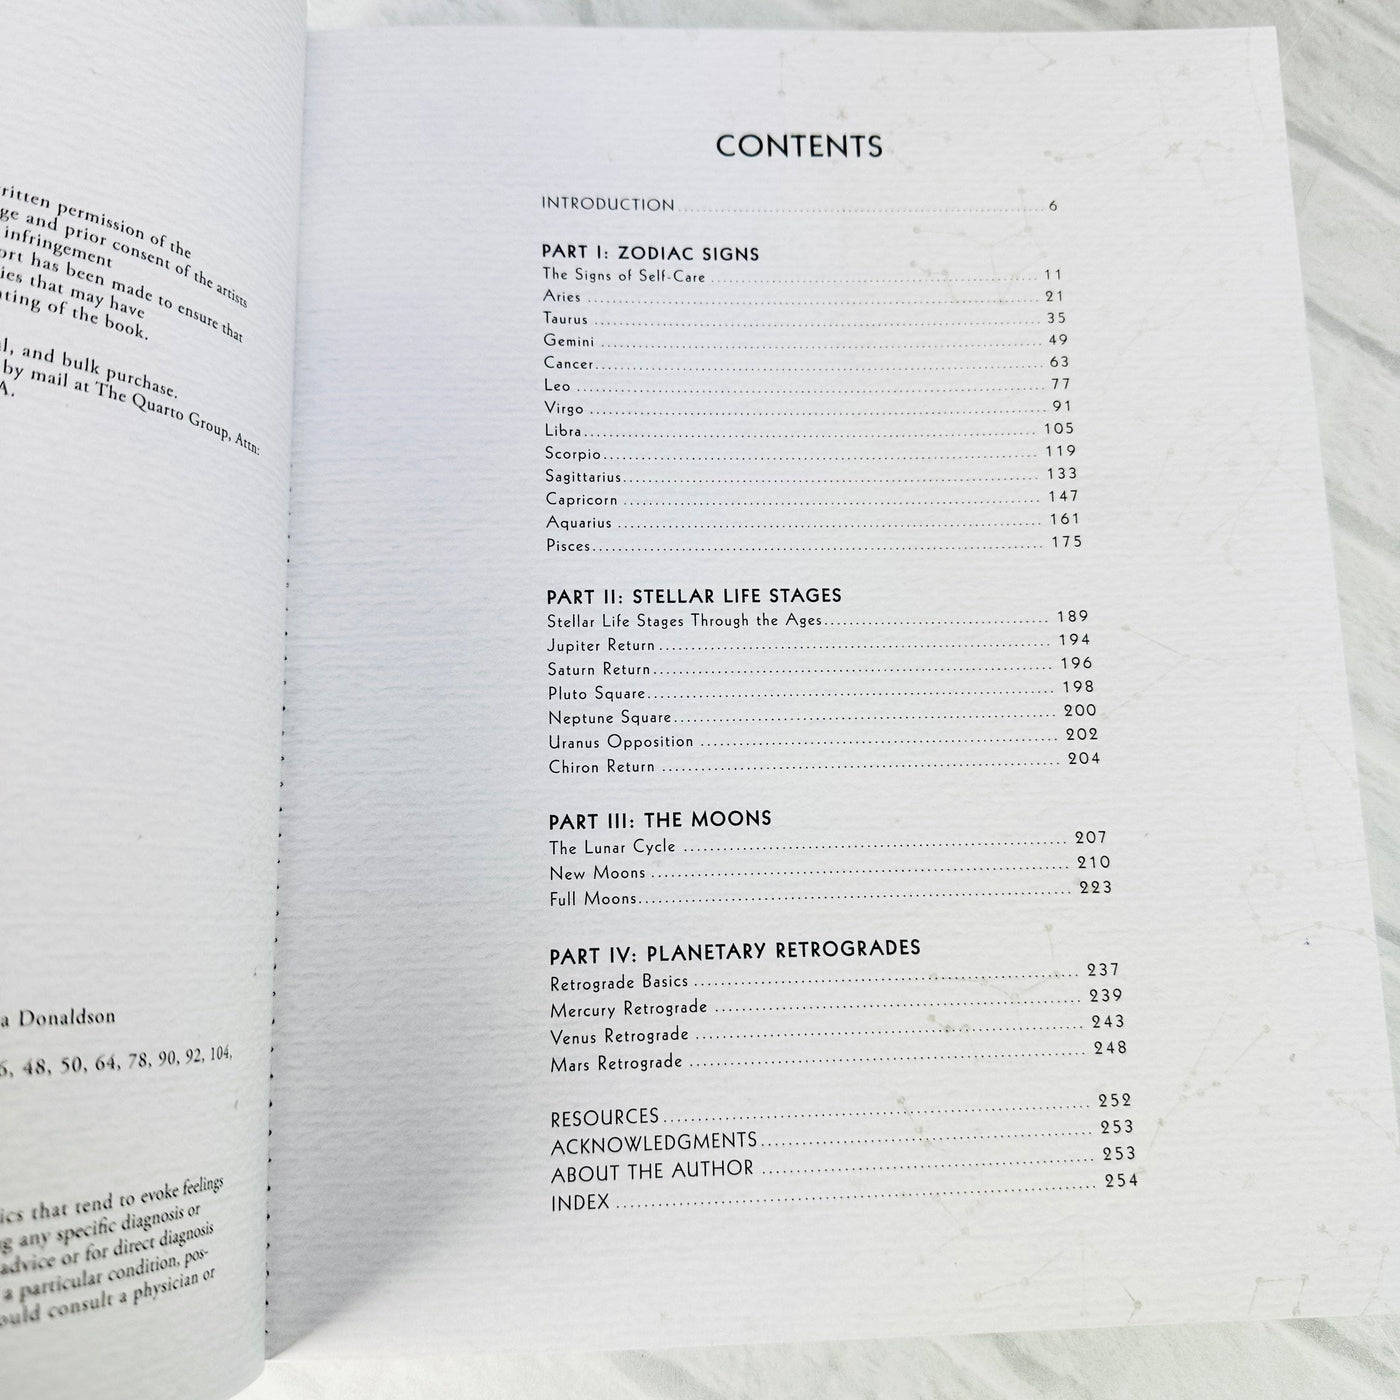  The Complete Guide To Astrological Self Care - close view of table of contents